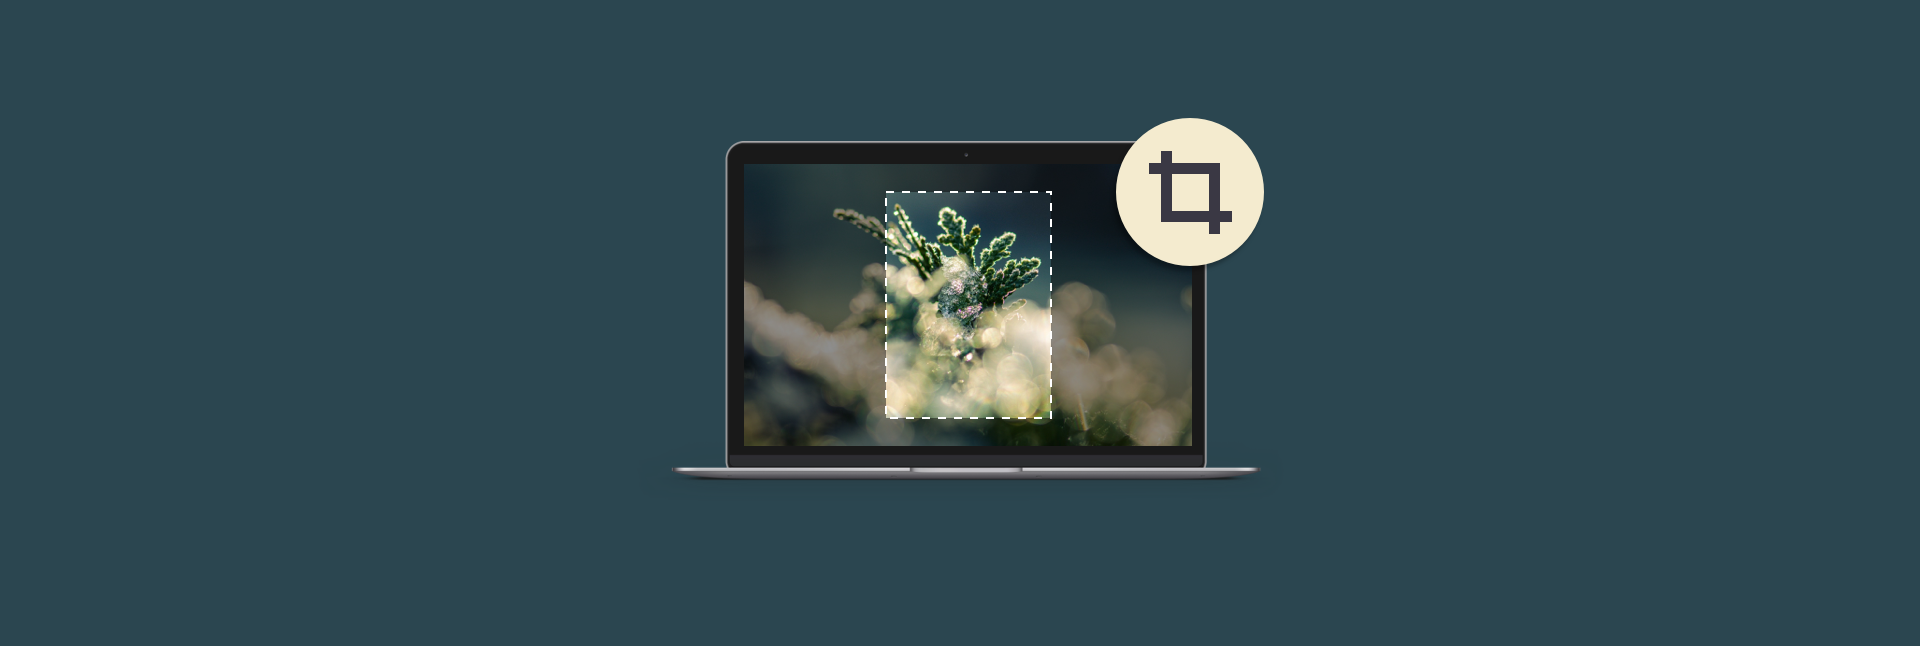 cropping software for mac